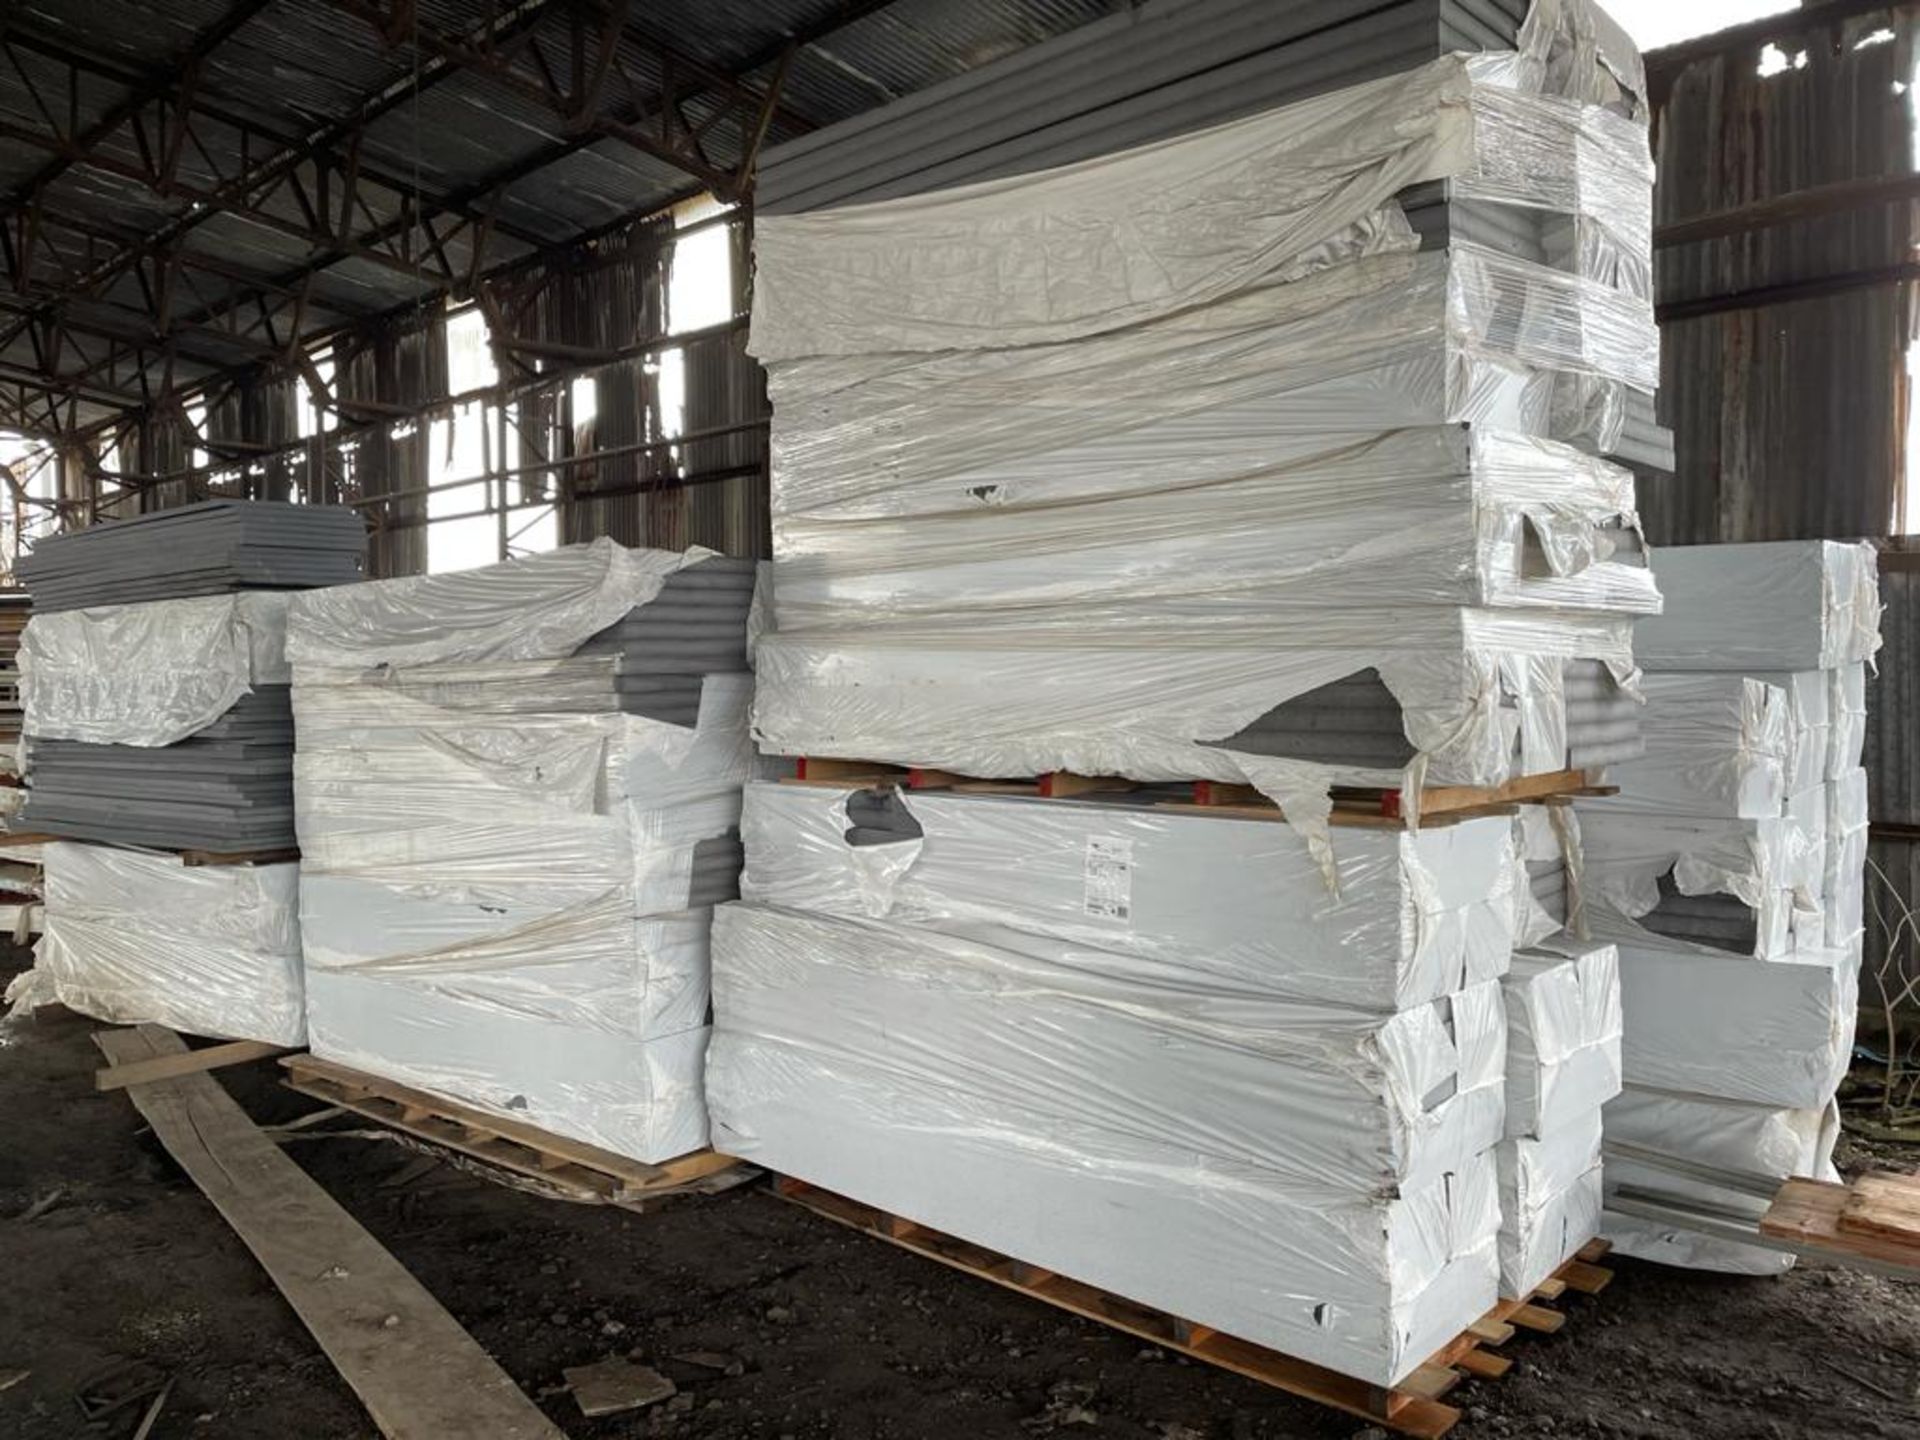 14 x Xenergy RTM Plus Extruded Polystyrene Thermal Insulation Boards - Size: 600 x 2500 x 60mm - - Image 6 of 7